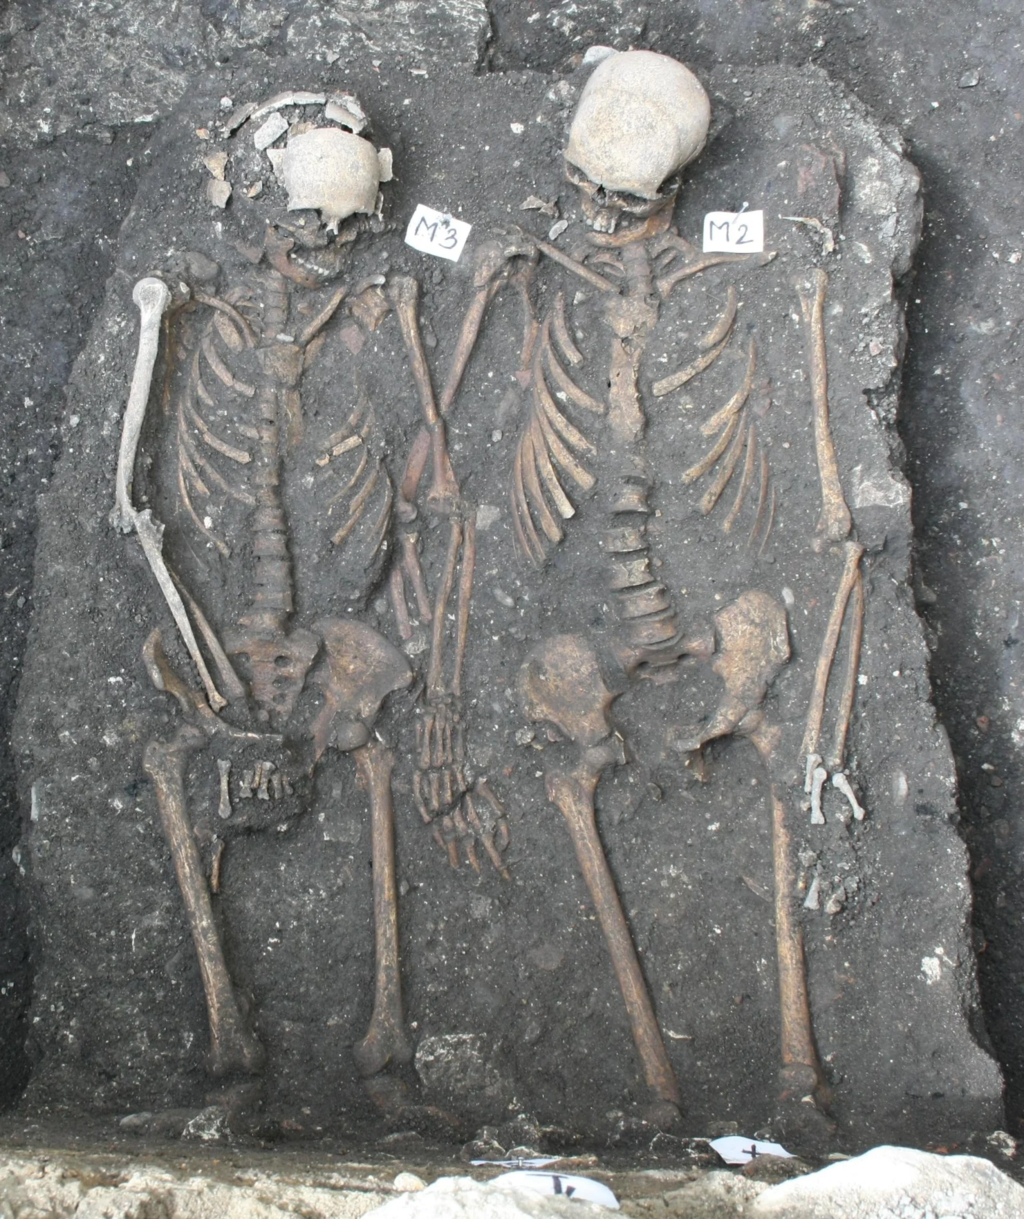 The Lovers of Cluj-Napoca were discovered in 2013. Photo: Adrian Andrei Rusu and Institute of Archaeology and Art History, CC BY-SA 4.0